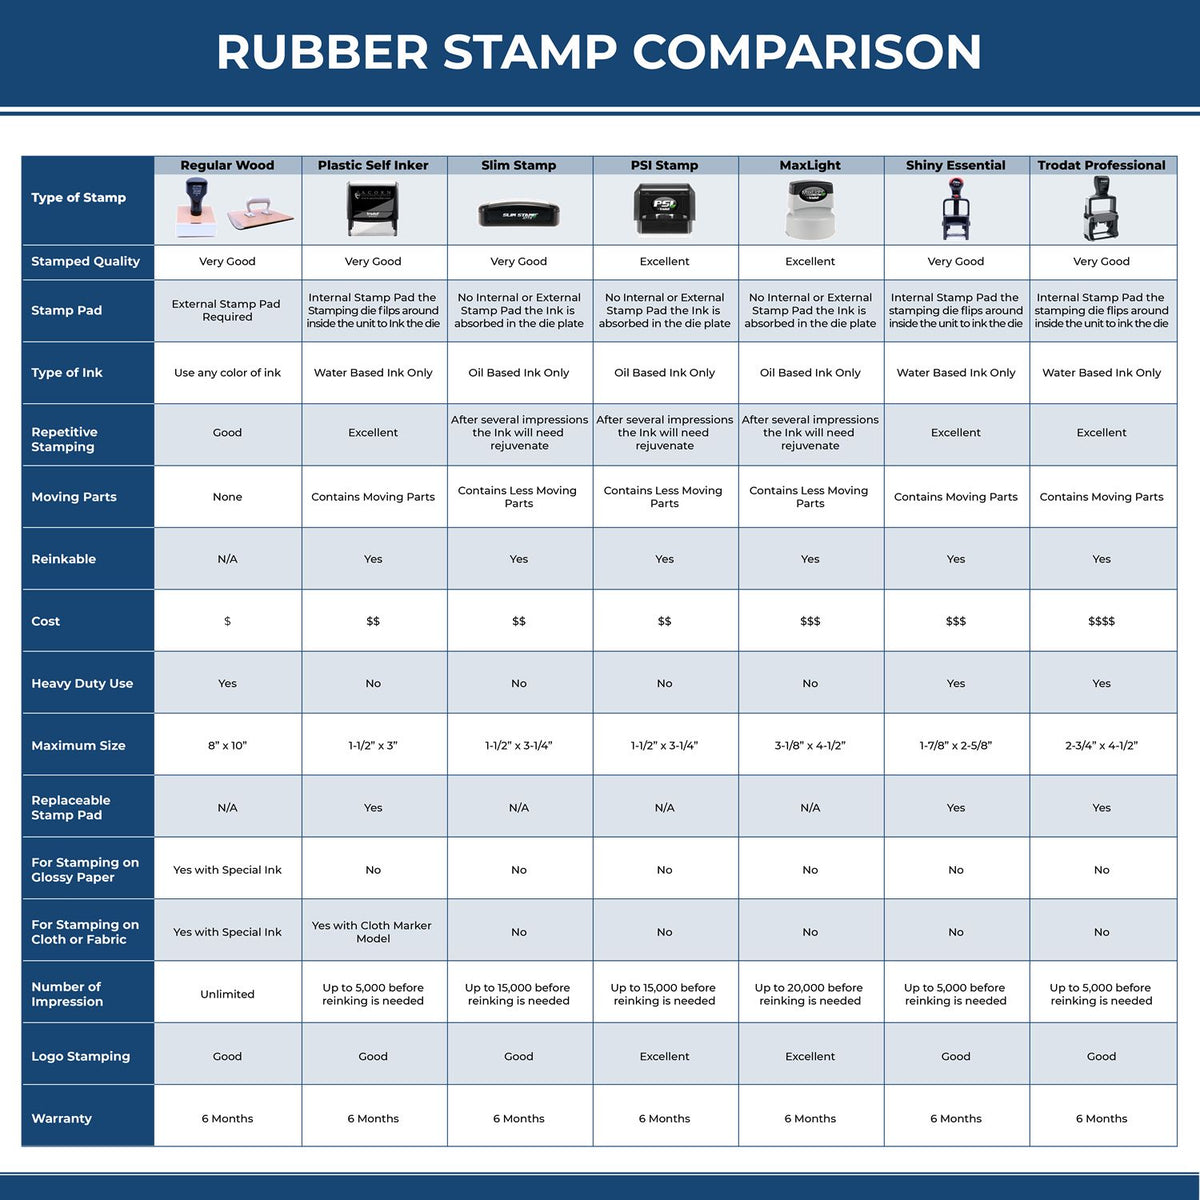 A comparison chart for the different types of mount models available for the Virginia Landscape Architectural Seal Stamp.